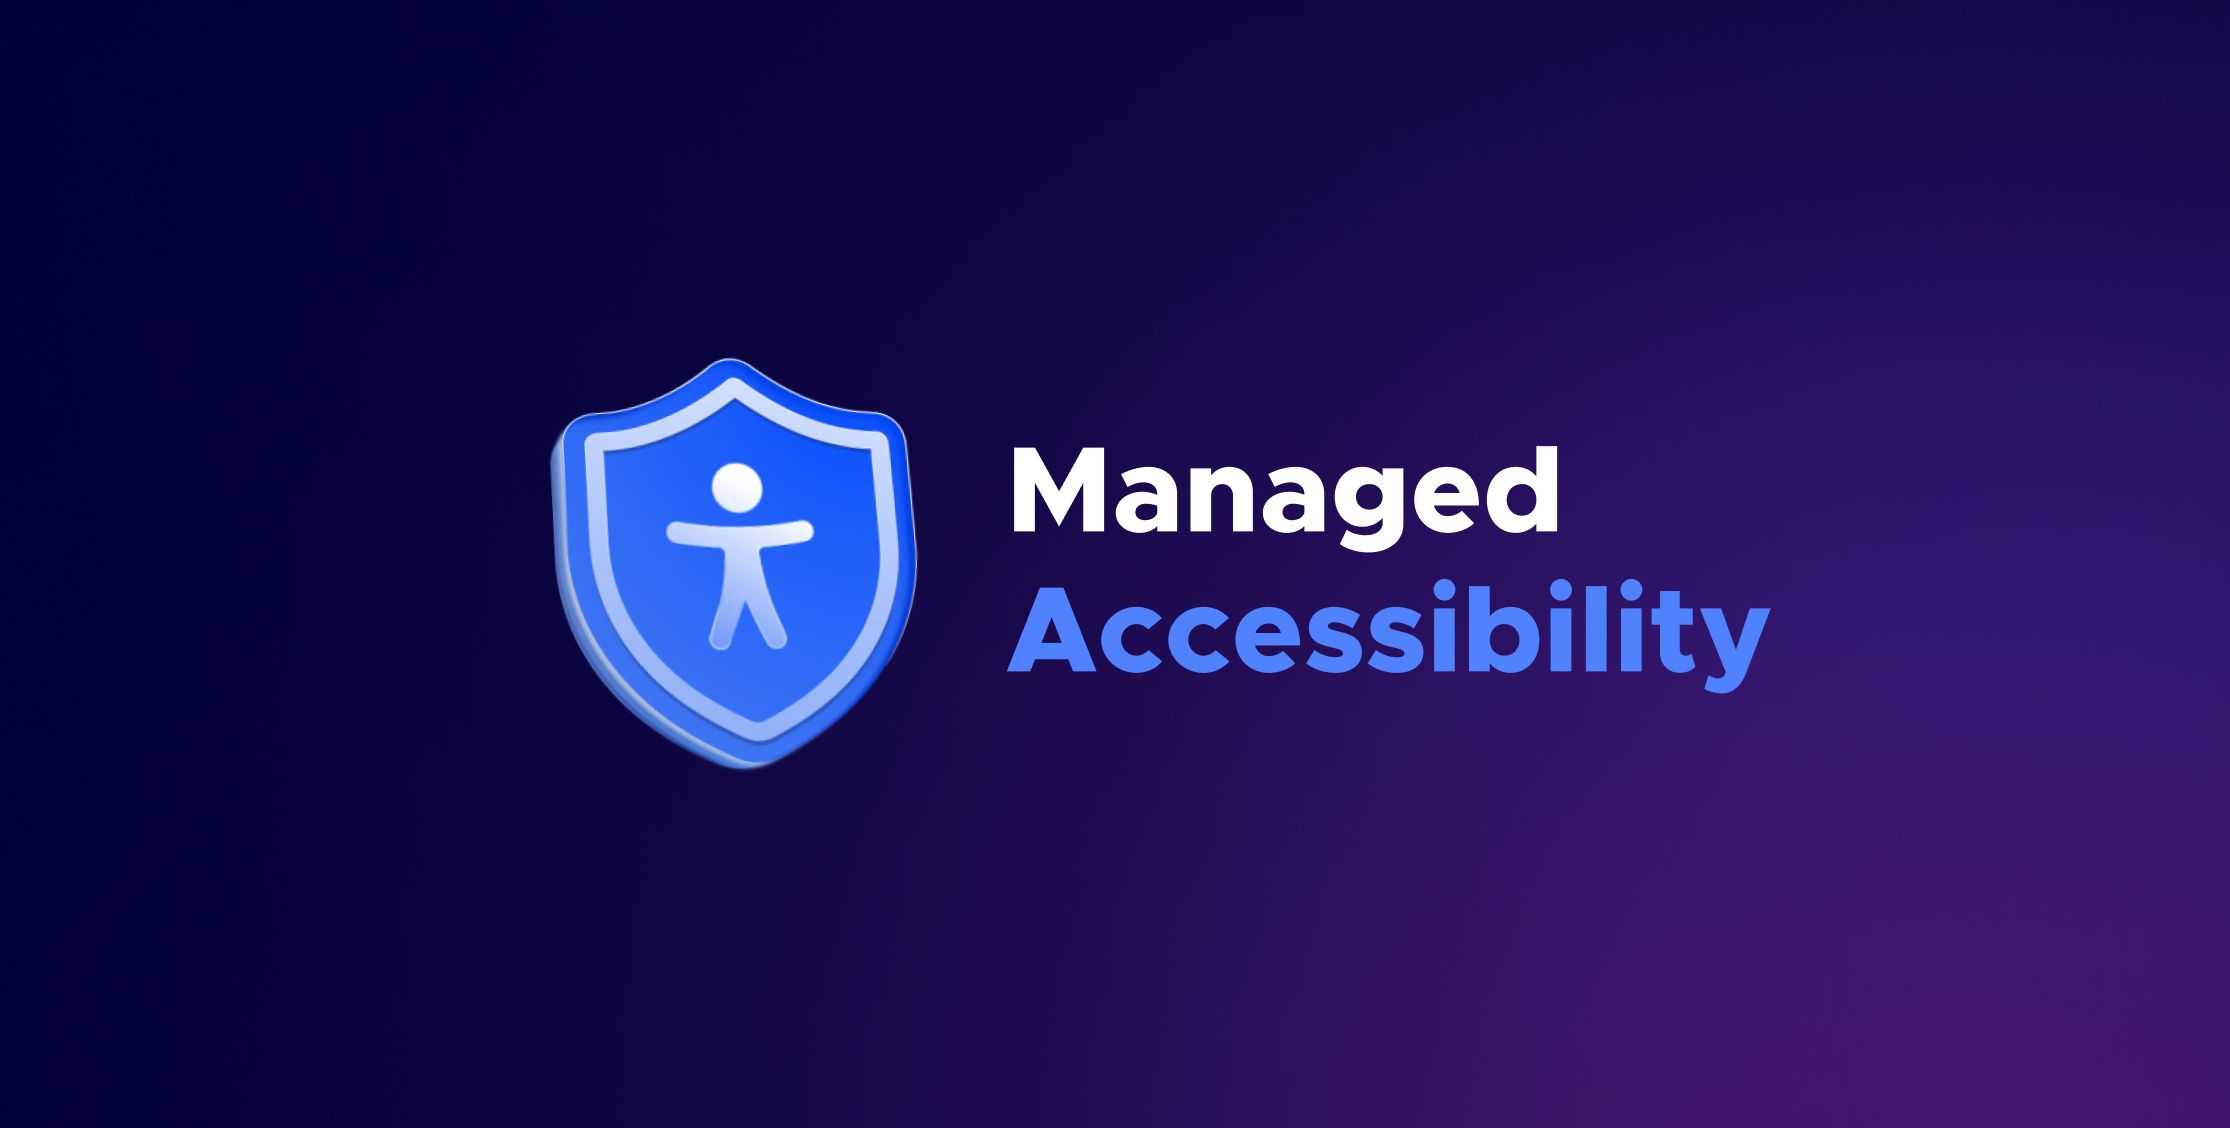 Icon of Blue shield with accessibility man sign with the writing "Managed Accessibility"